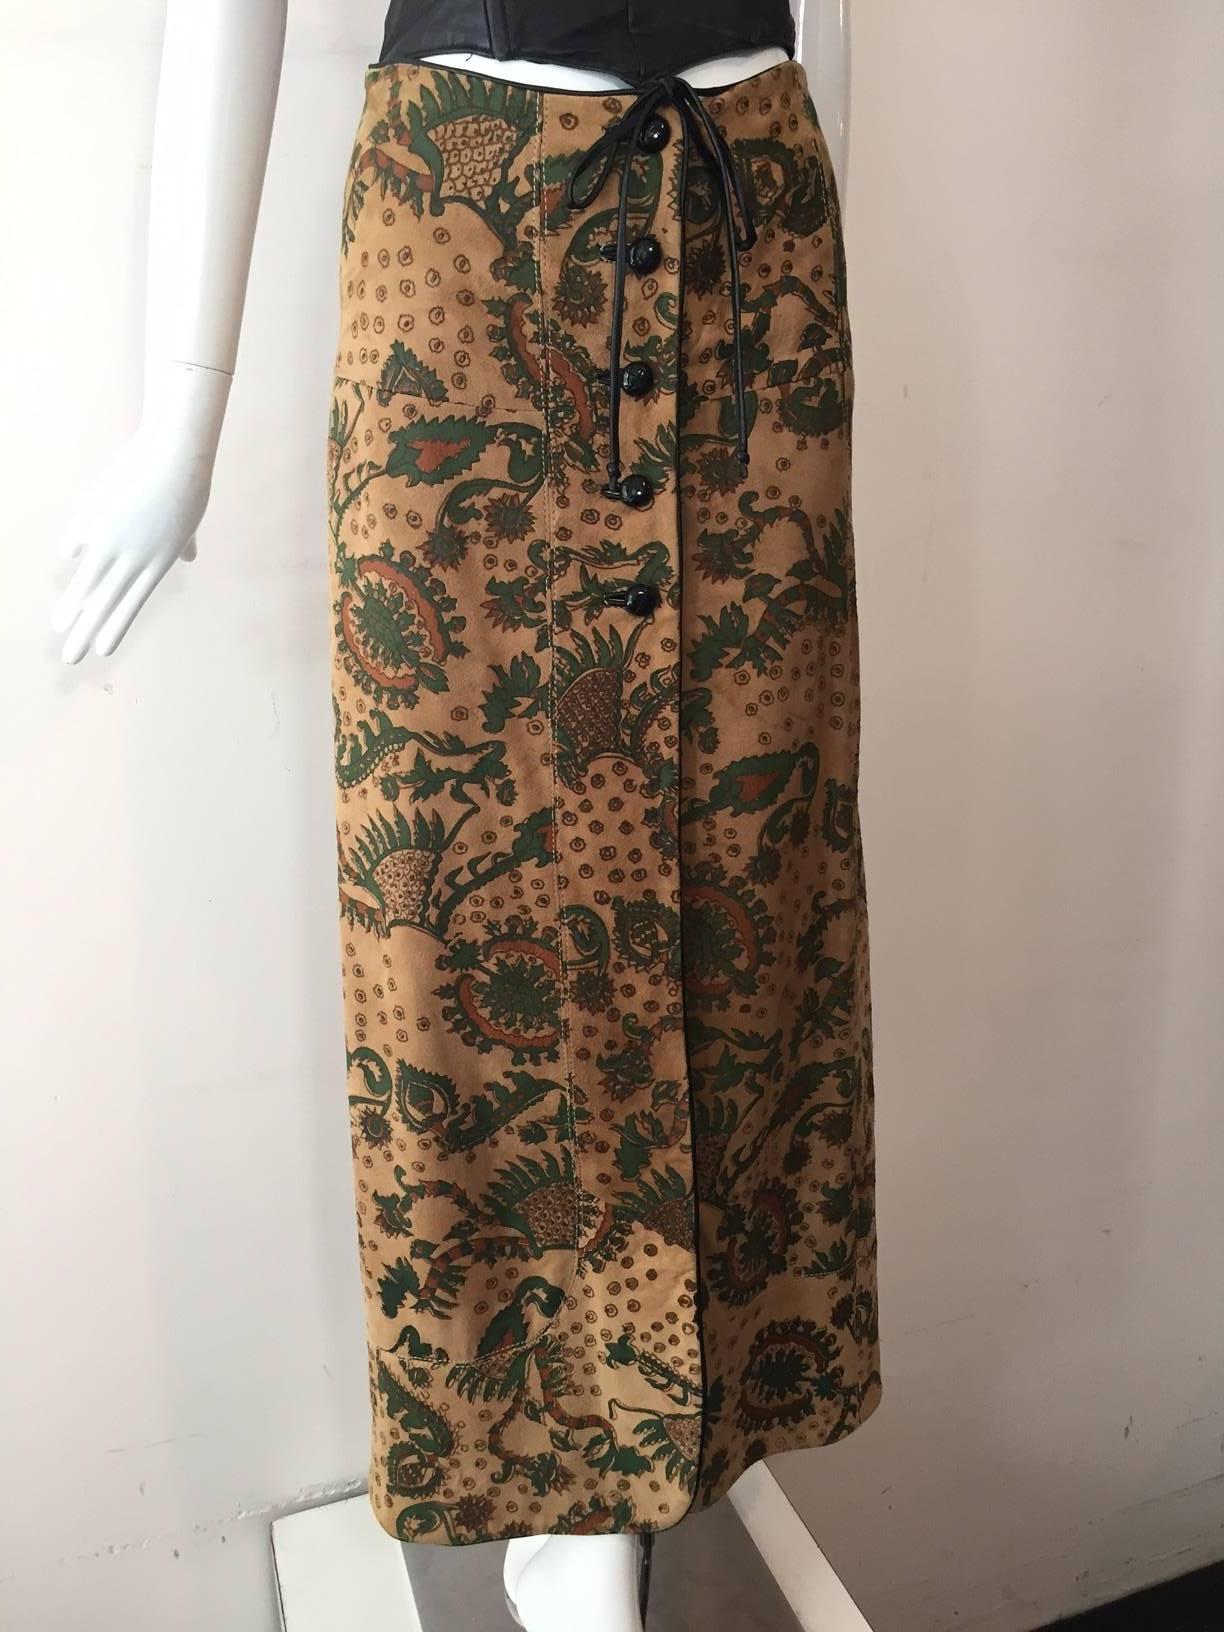 A great BoHo 1970s Geoffrey Beene green and brown paisley printed suede maxi skirt.  Black leather piping , waist tie and leather buttons. Fully lined in rayon crepe.  High opening at front--great leg-appeal!